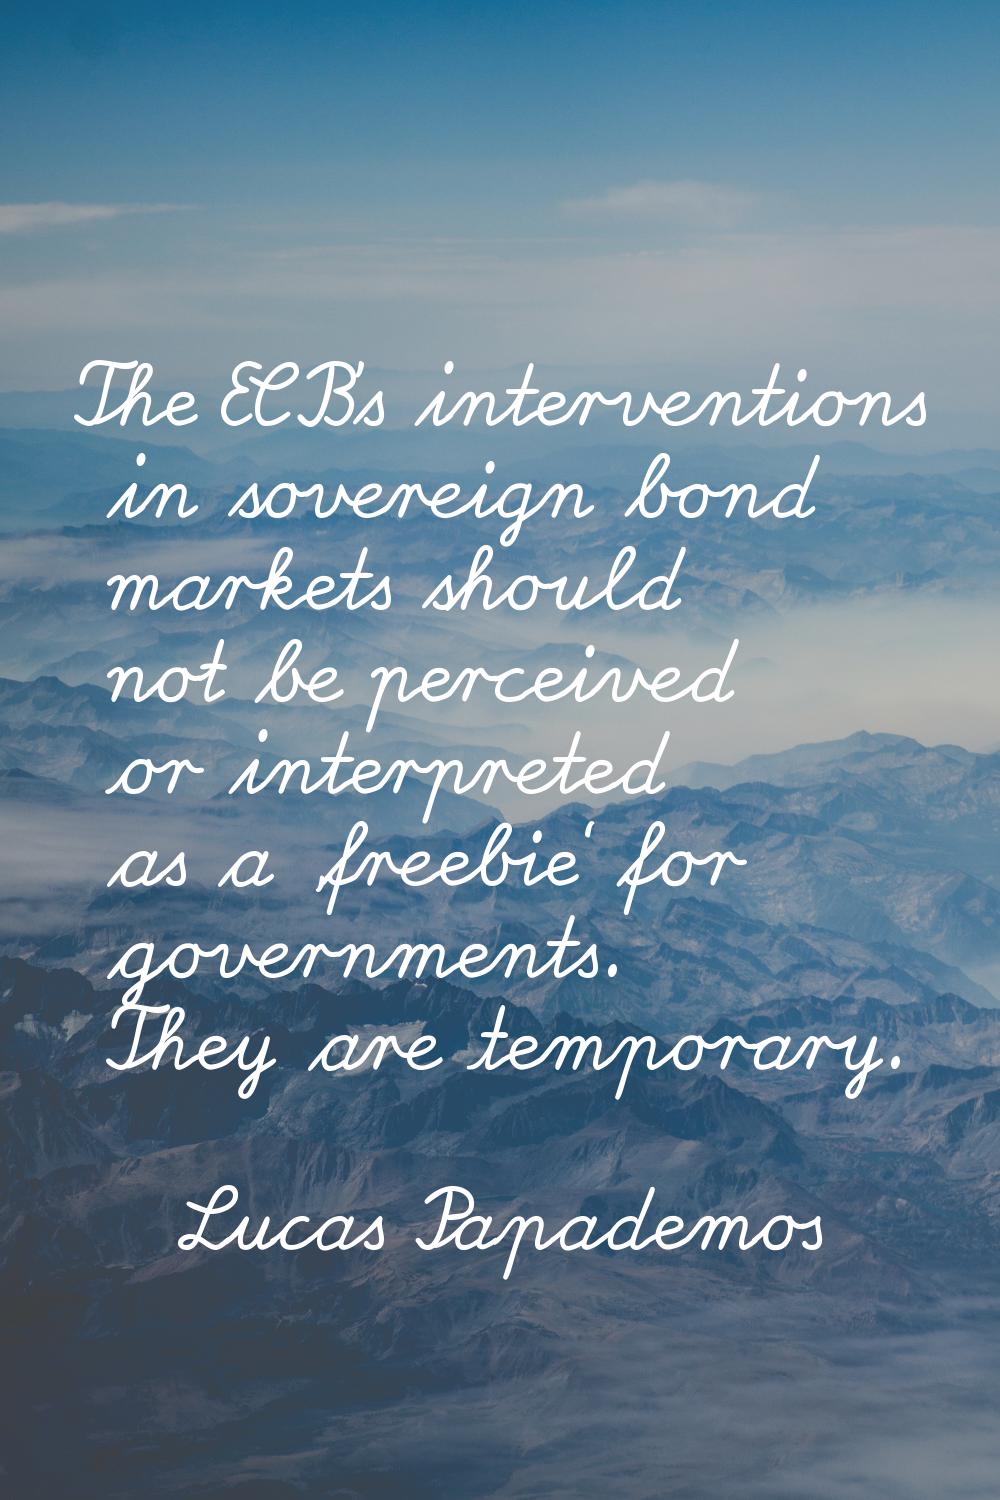 The ECB's interventions in sovereign bond markets should not be perceived or interpreted as a 'free